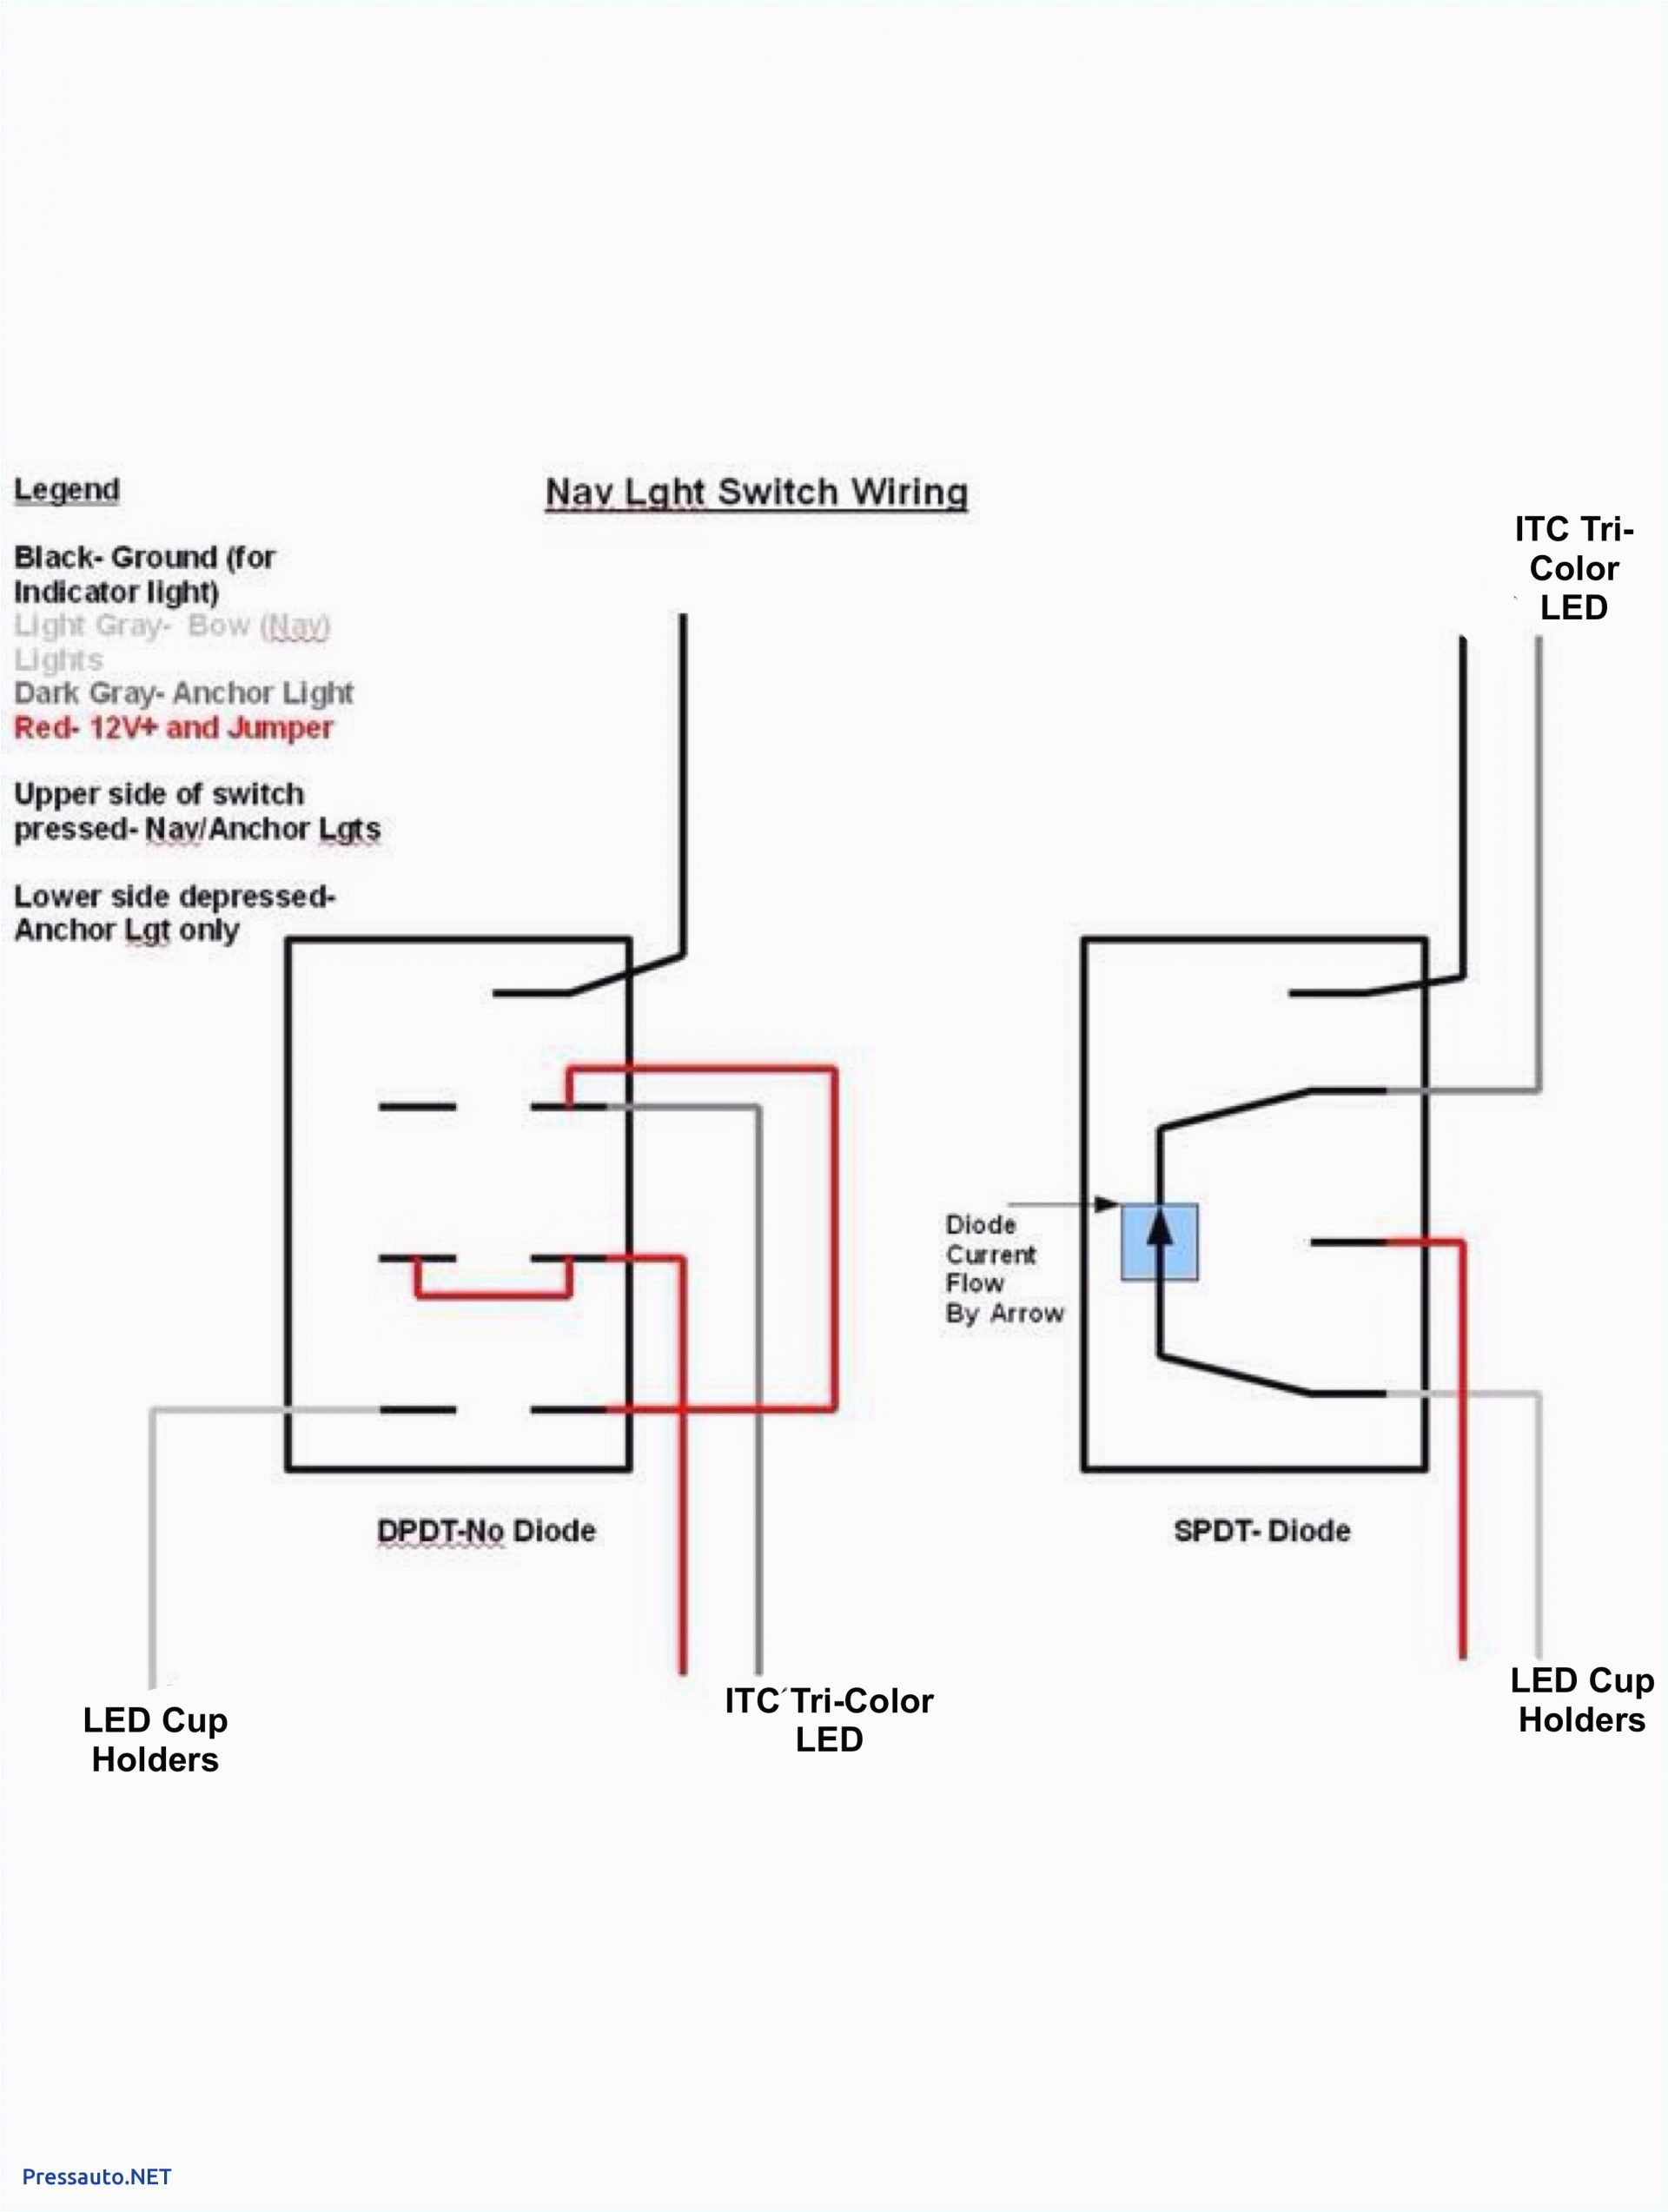 toggle switch wiring diagram catch up tv channel 12v to run electric motor position volt multiple lights middle of jpg